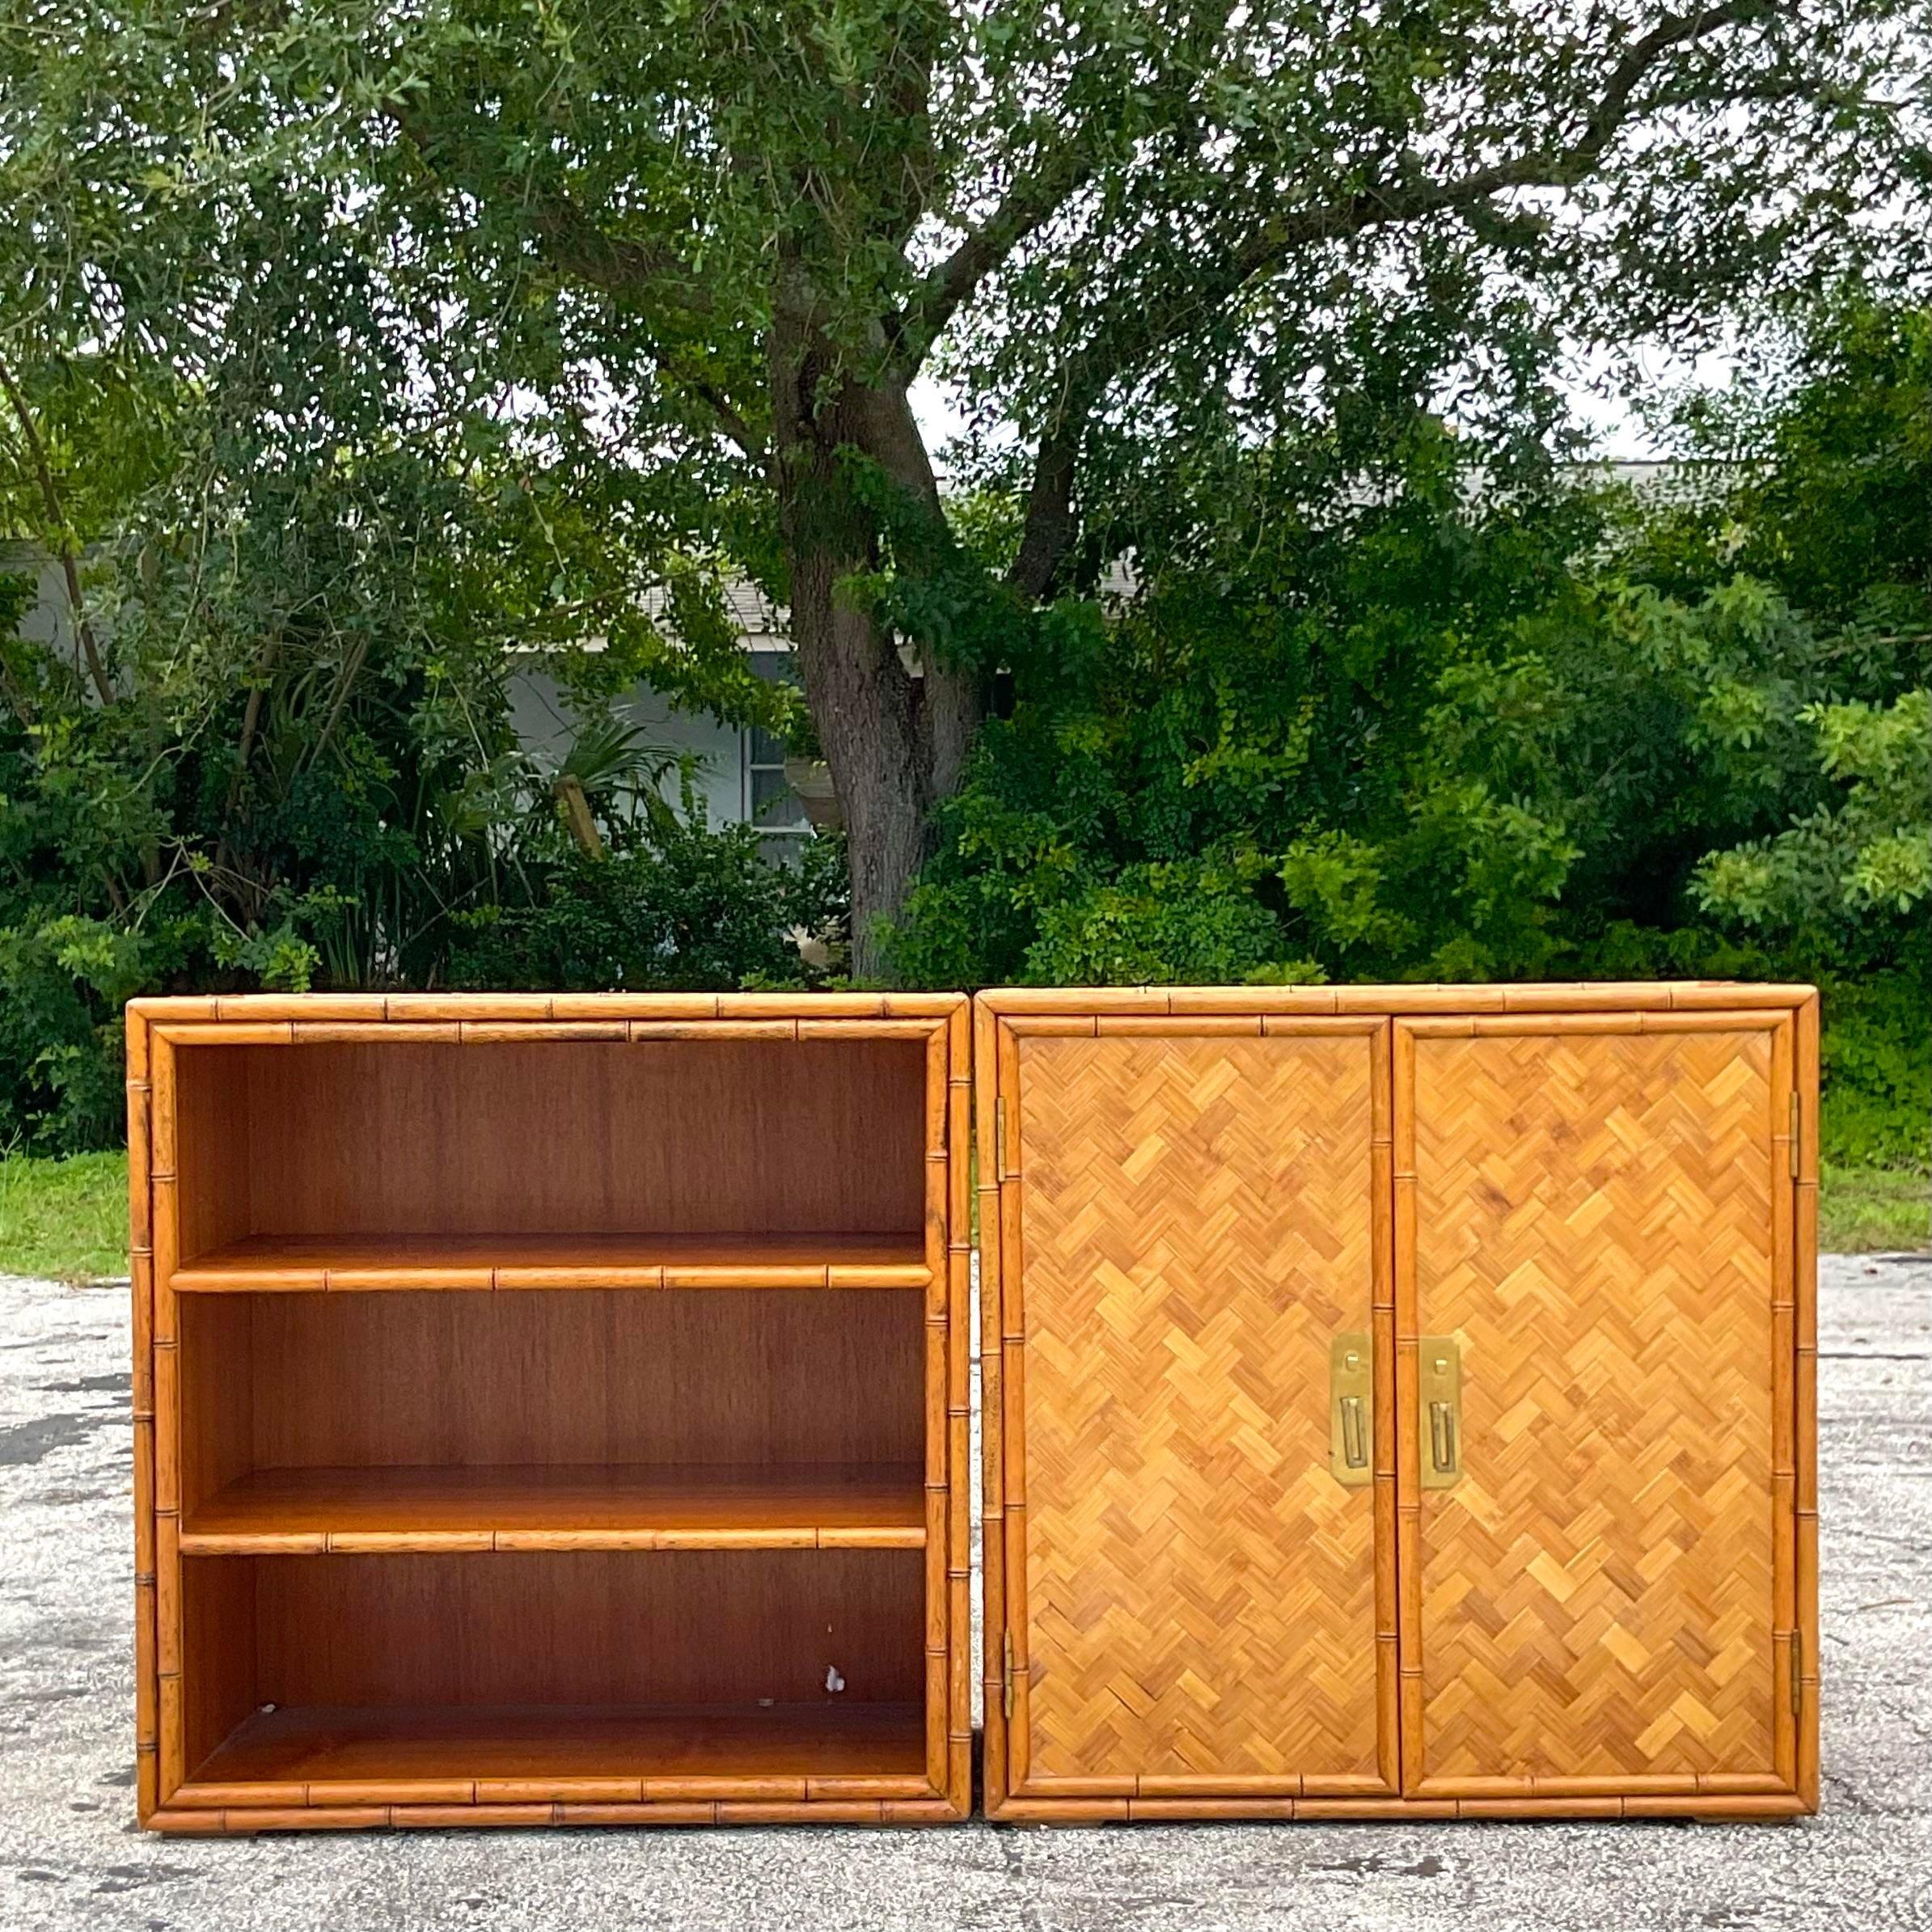 A fabulous vintage Coastal credenza. Two storage cabinets paired together to create the perfect storage credenza. Perfect together as a credenza or separate to use and nightstands. You decide! Acquired from a Palm Beach estate.

Individual width for